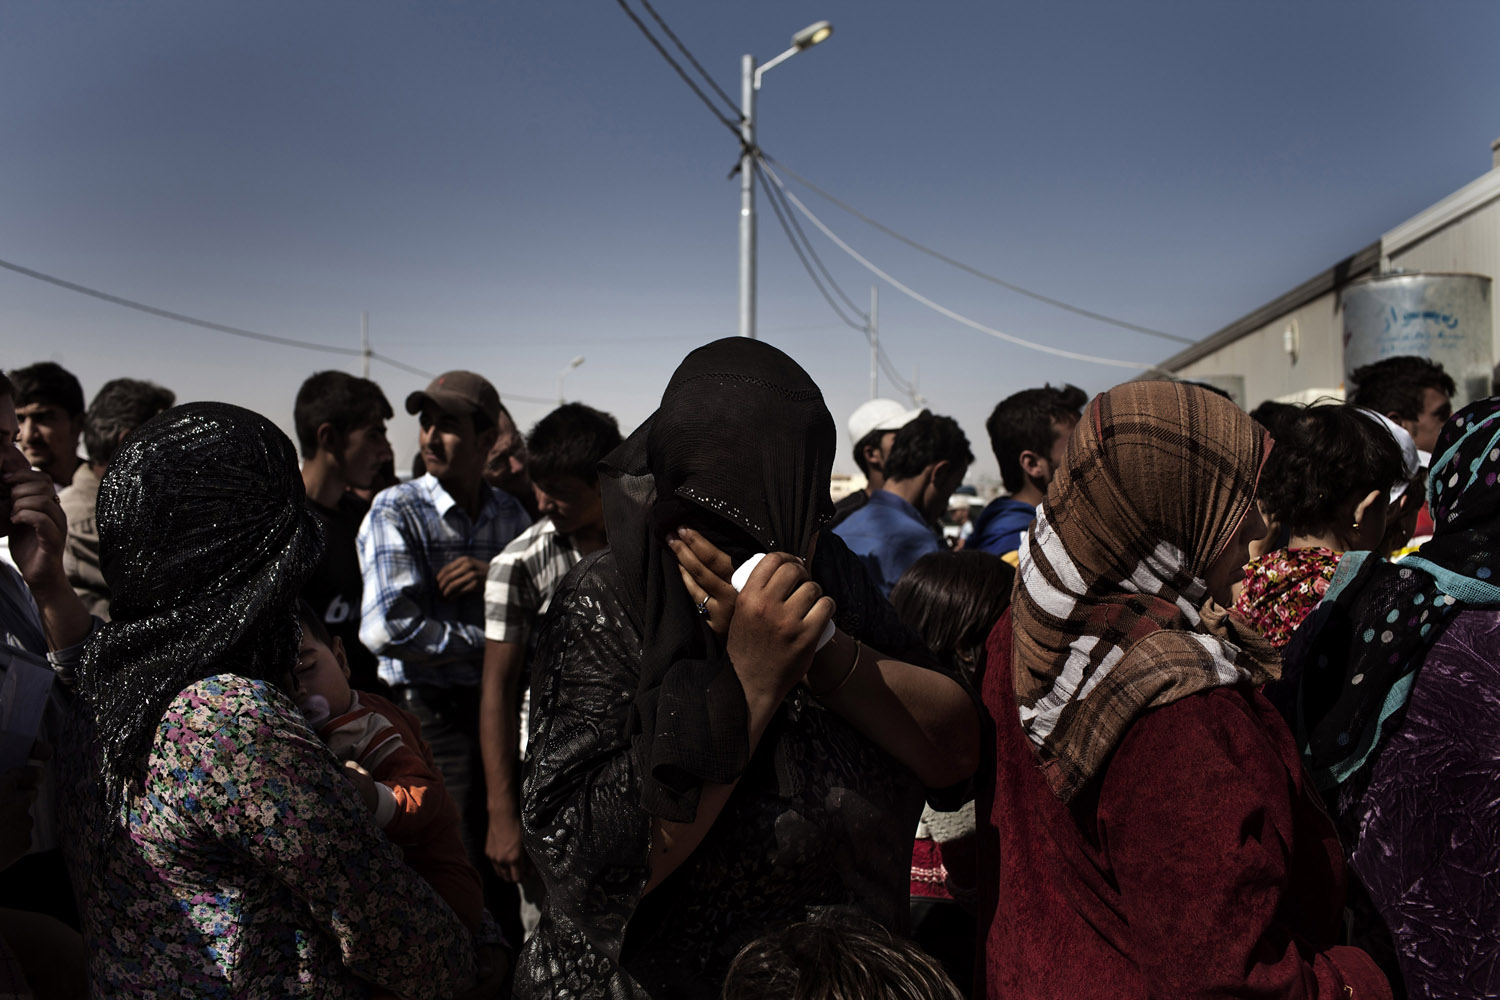 Kurdish-Syrian refugees waiting in the queue for registration at the refugee camp of Kawergosk near Erbil, Iraq.